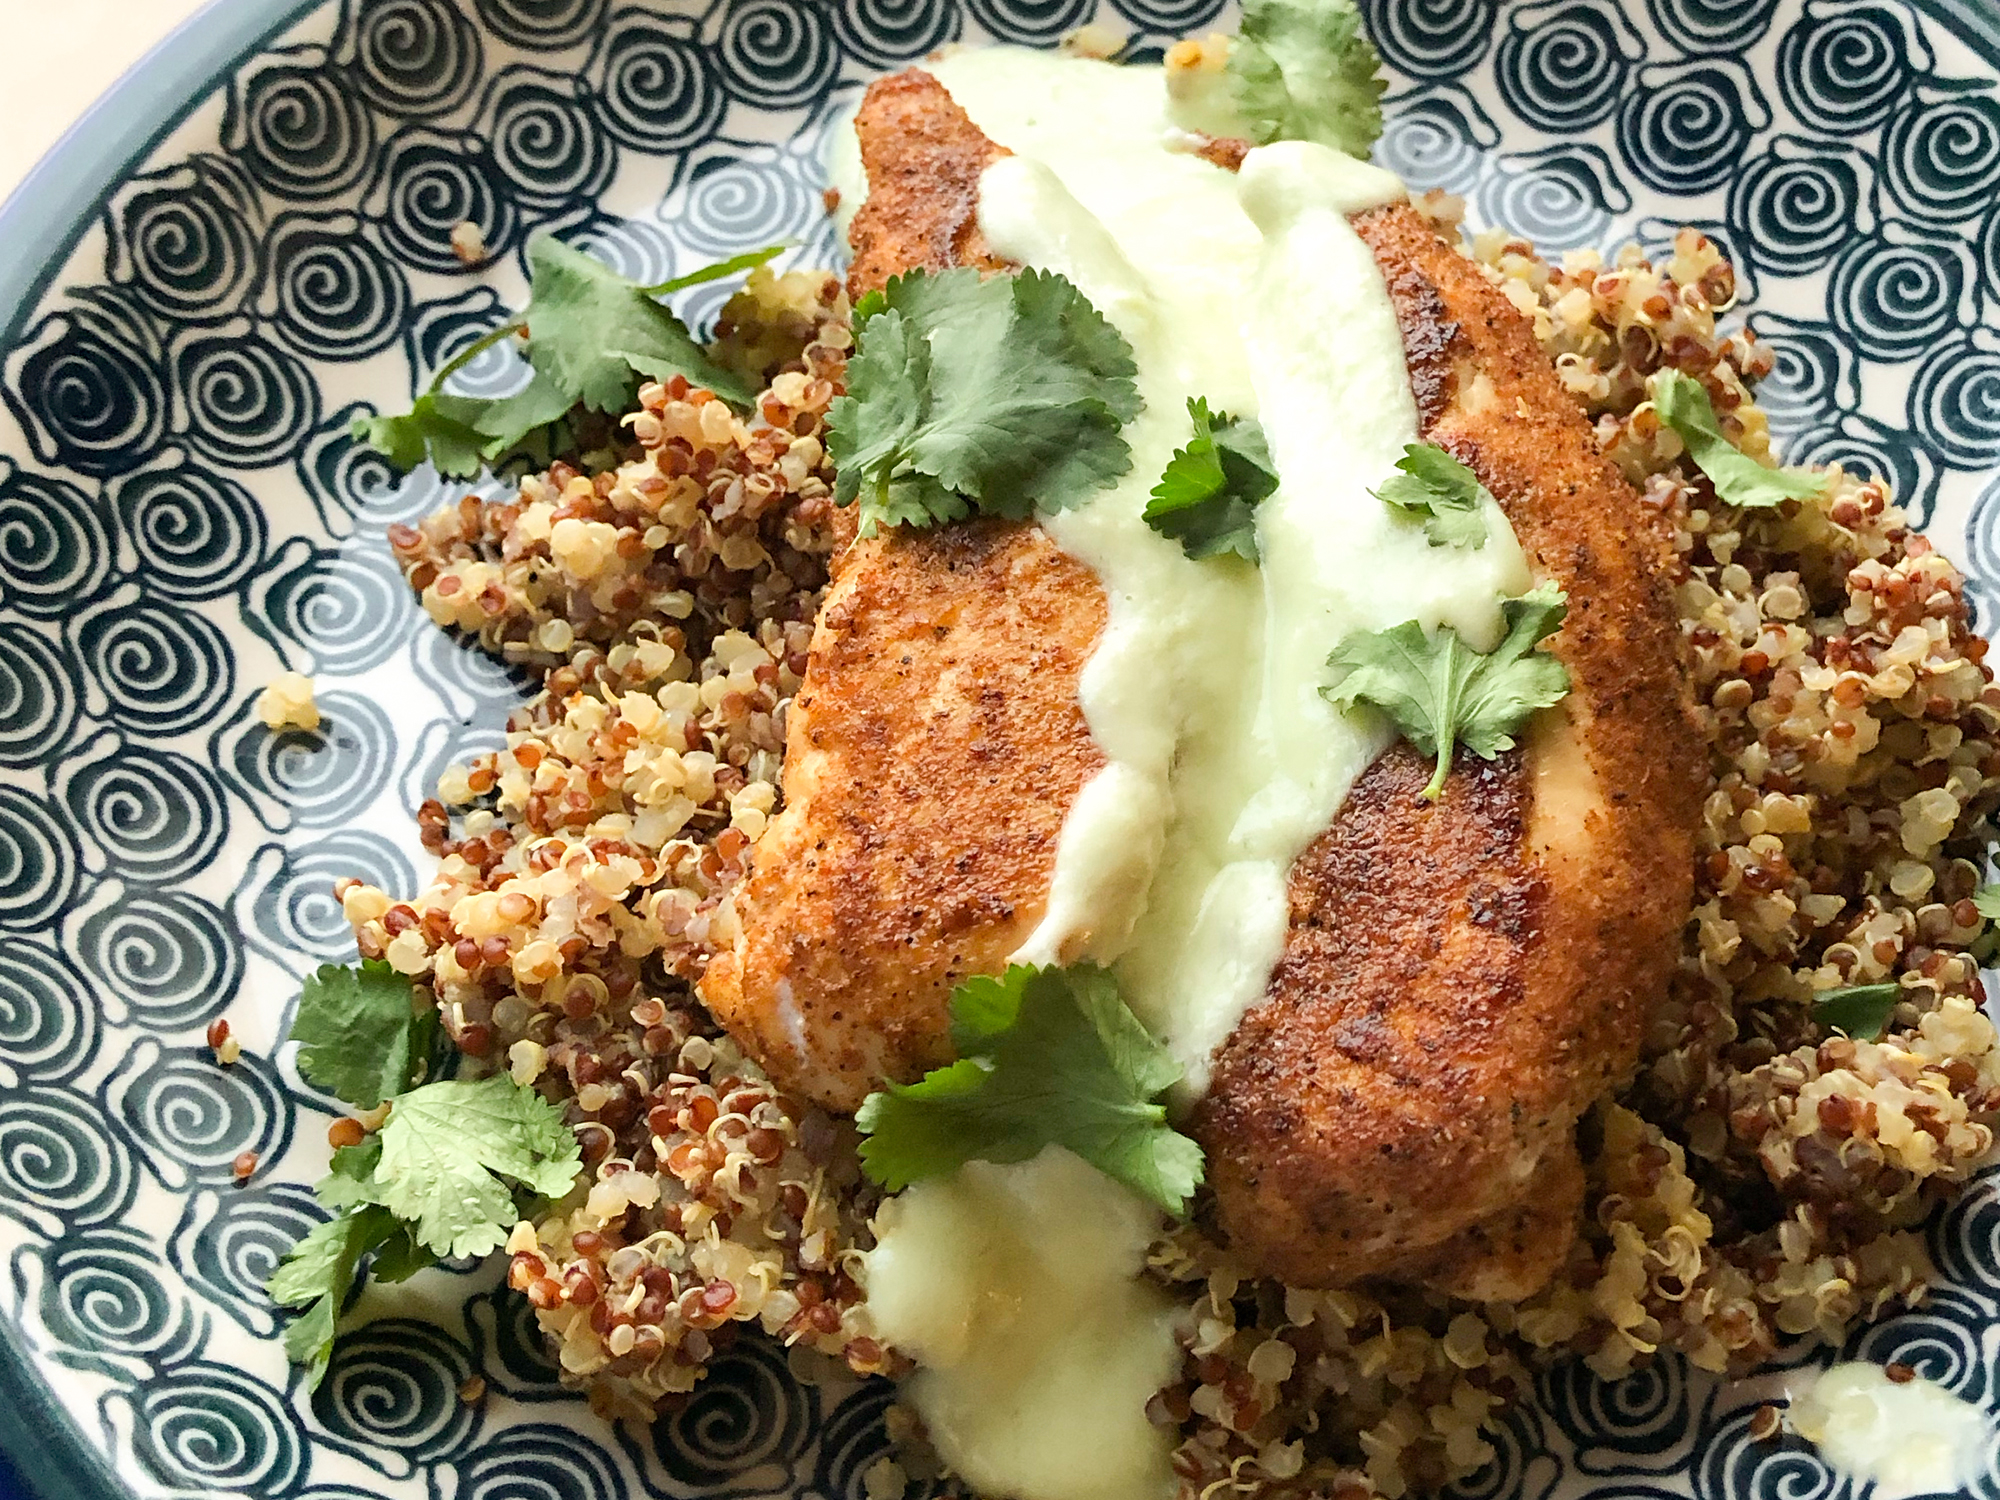 close up view of Blackened Chicken with Avocado Cream Sauce over quinoa, garnished with fresh herbs, on a plate